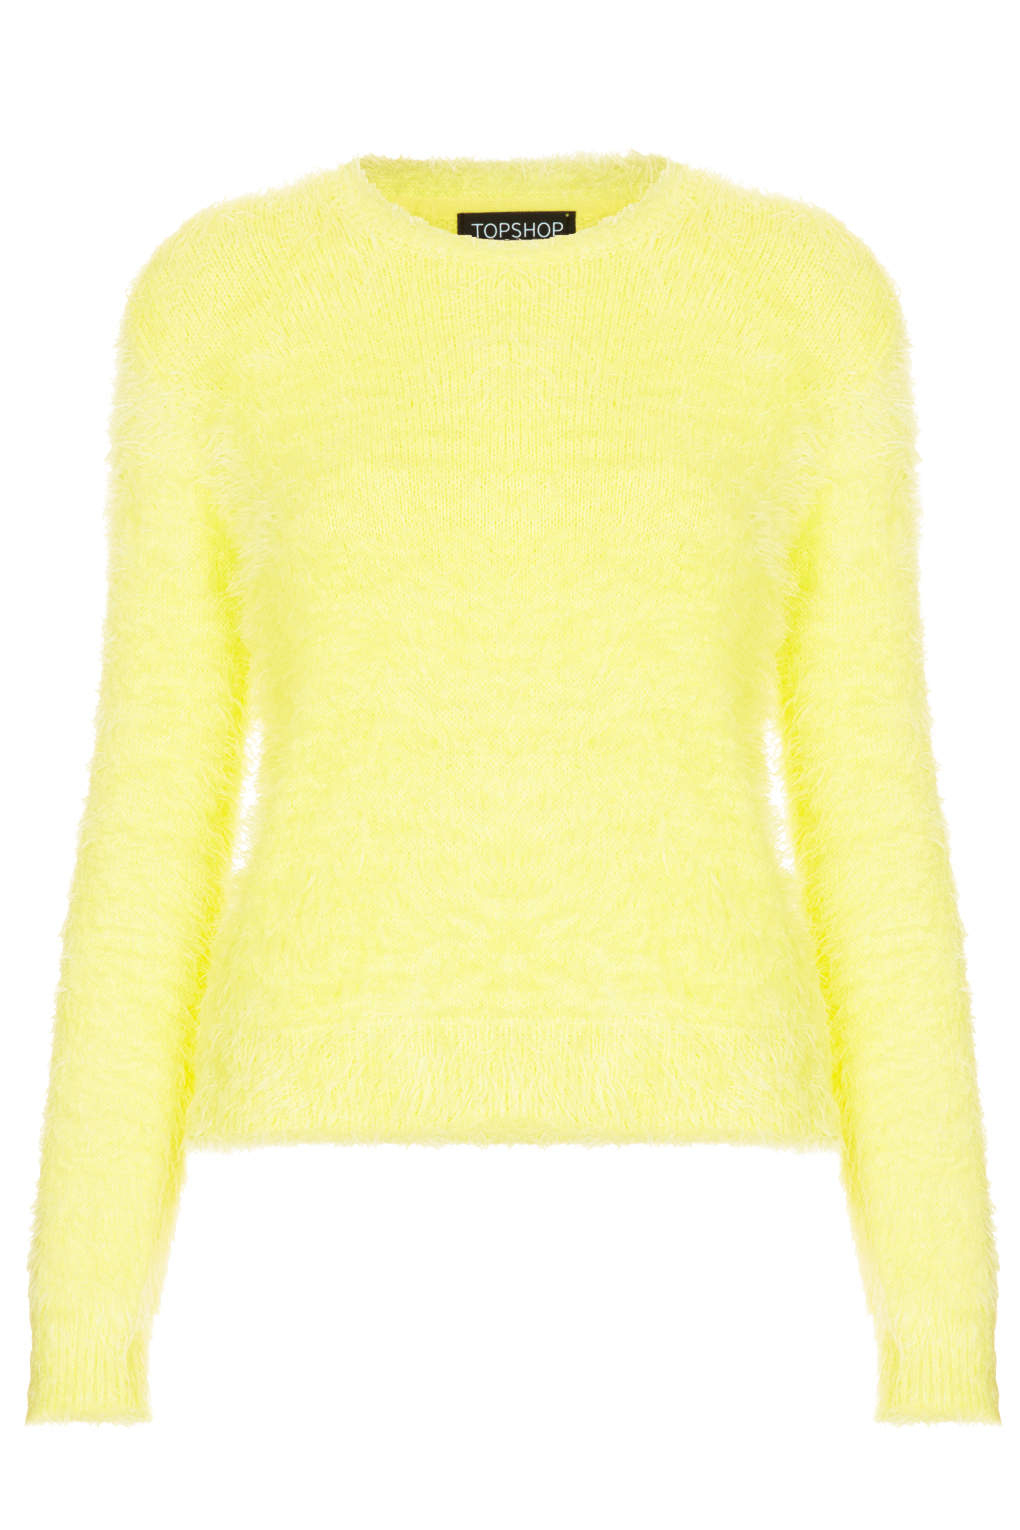 Lyst - Topshop Knitted Fluffy Crew Jumper in Yellow